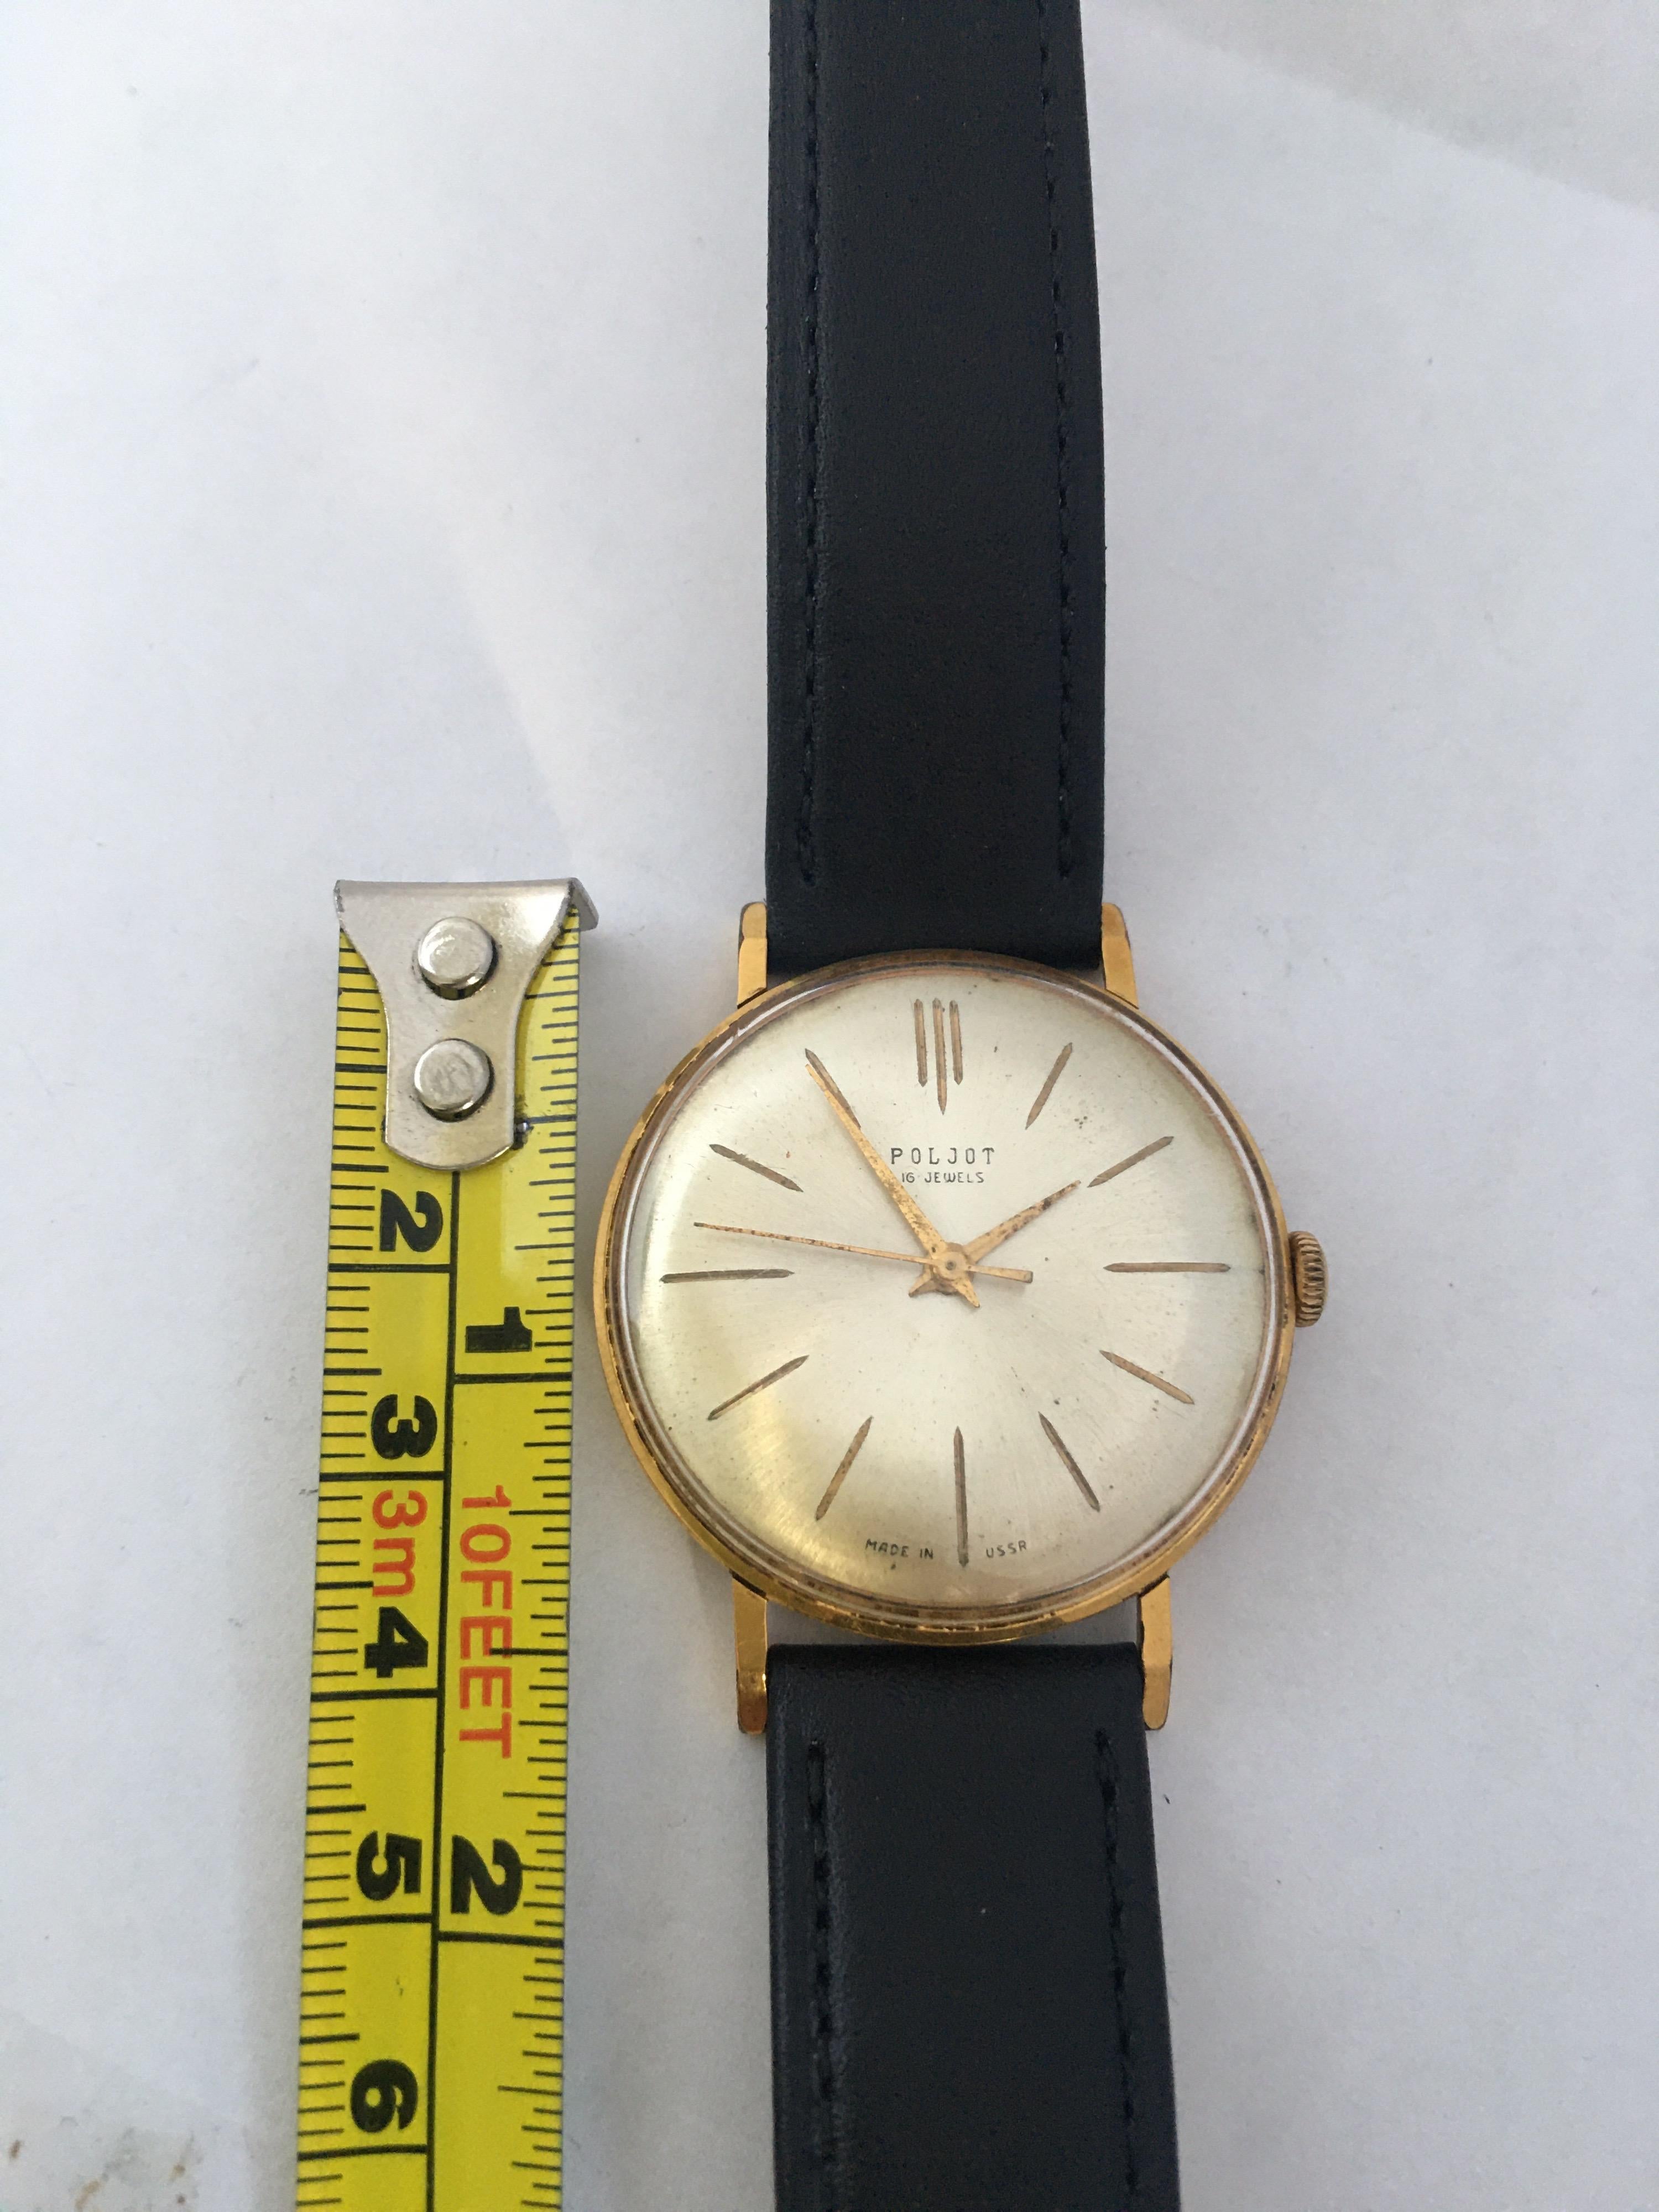 Vintage 1960s Au20 Gold Plate POLJOT Mechanical Watch In Good Condition For Sale In Carlisle, GB